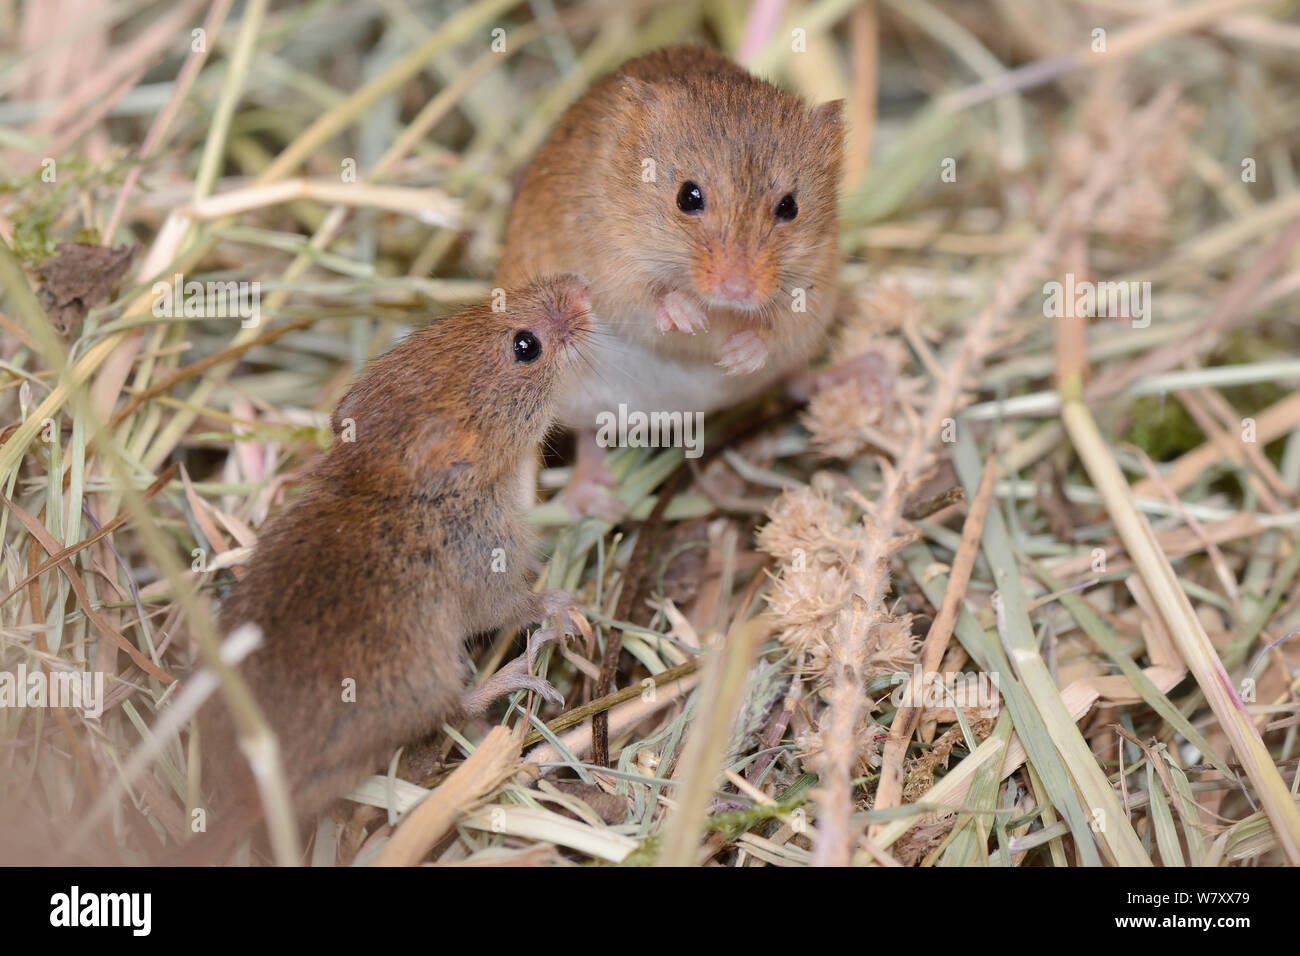 Juvenile and adult Harvest mouse (Micromys minutus) foraging on millet from a seed spray within a breeding cage, being reared for a reintroduction project, Lifton, Devon, UK, May. Stock Photo